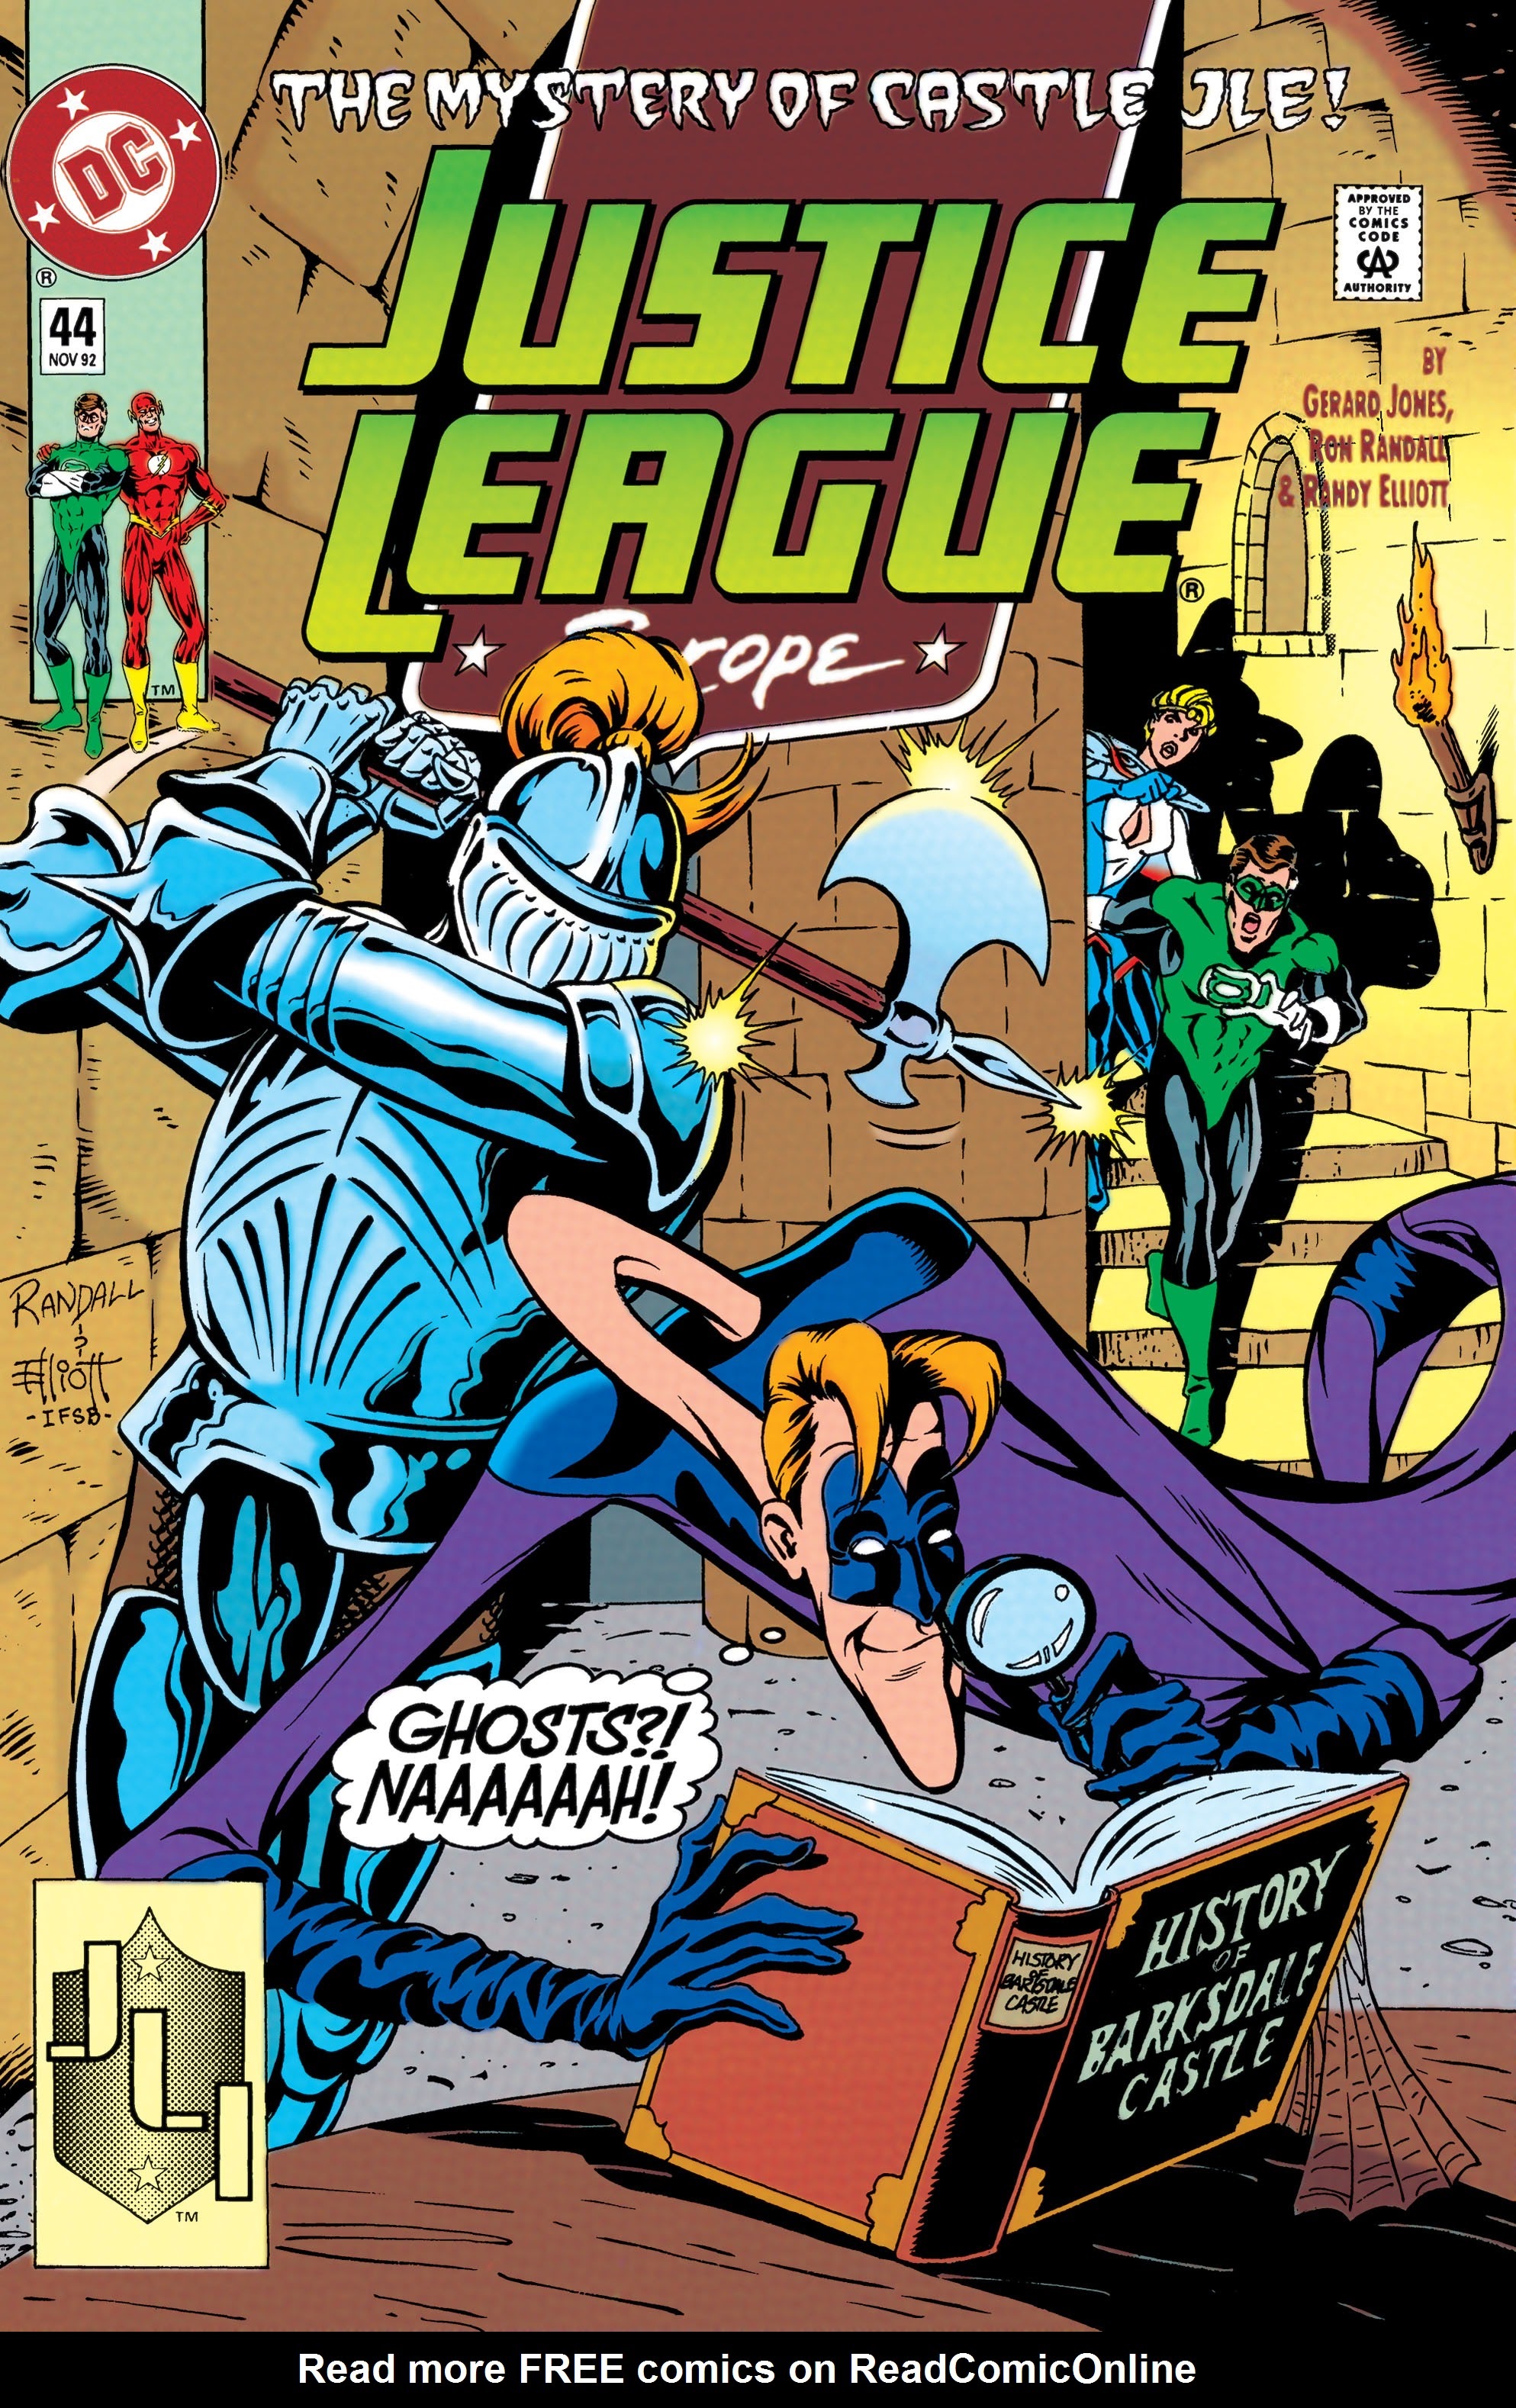 Read online Justice League Europe comic -  Issue #44 - 1